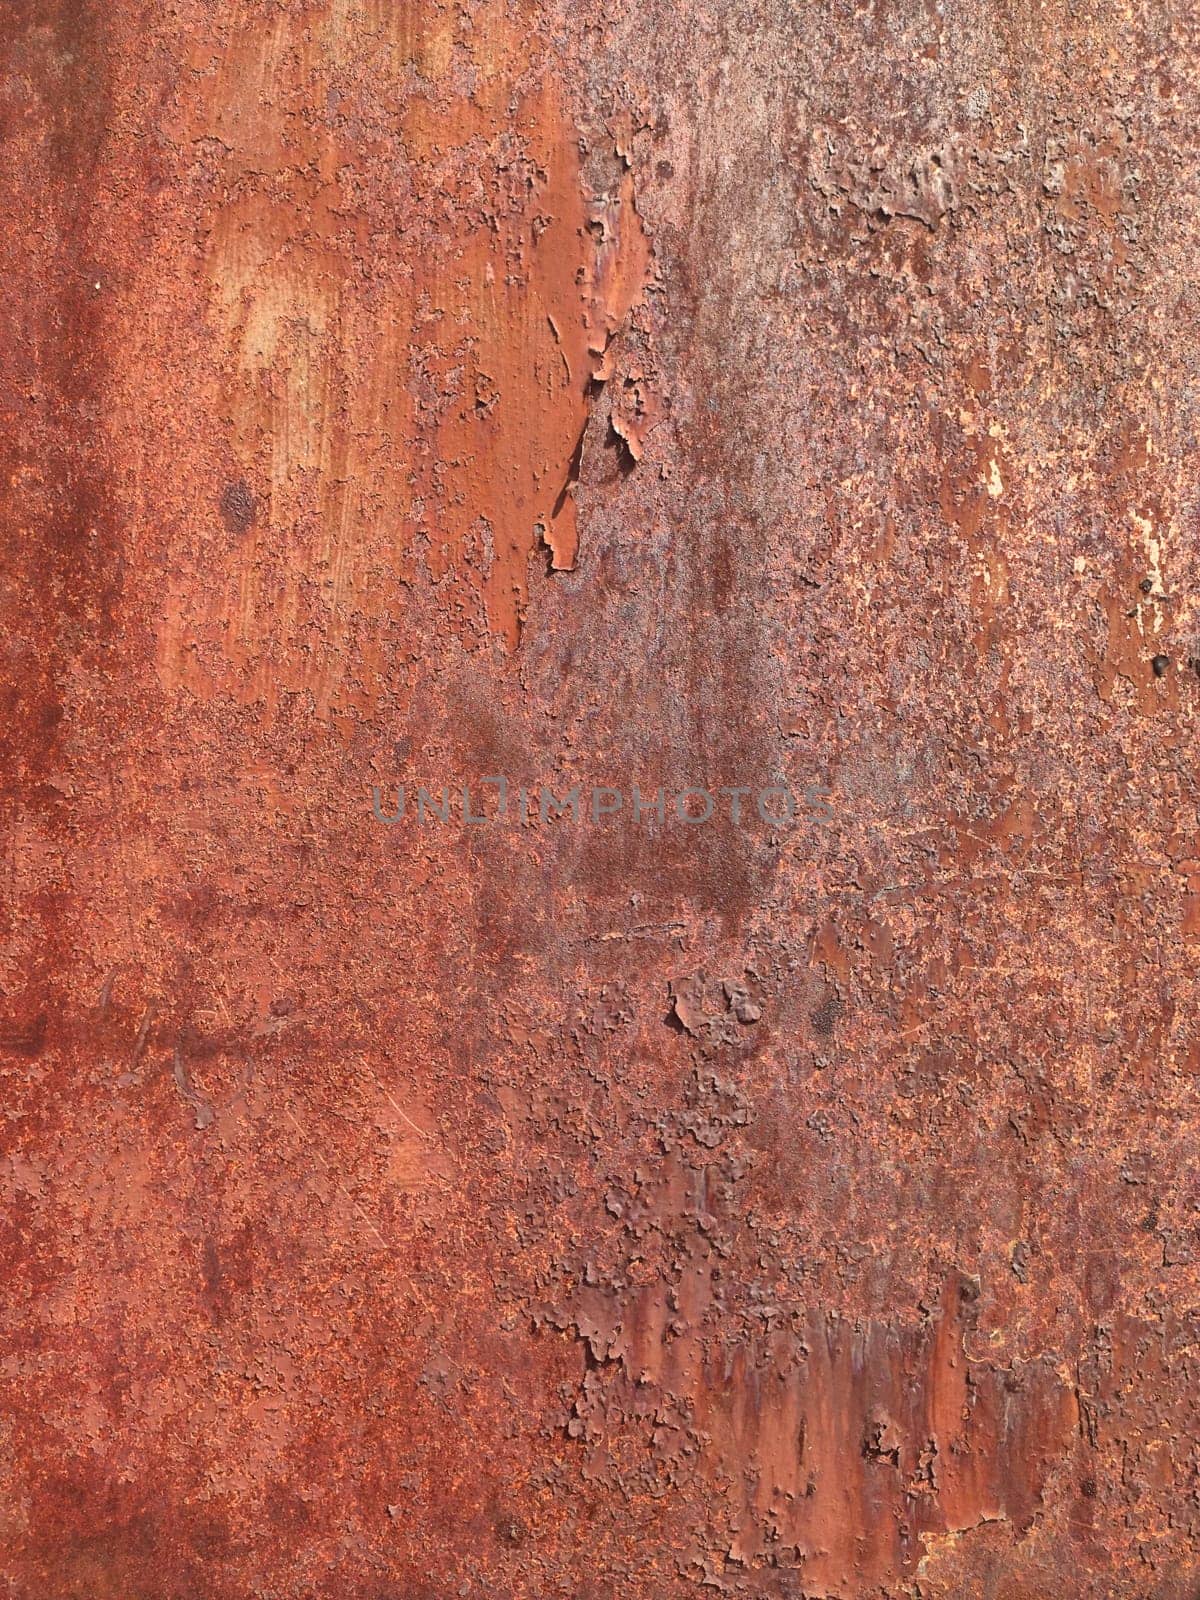 Grunge rusted metal texture. Rusty corrosion and oxidized background. Worn metallic iron rusty metal background by OnPhotoUa